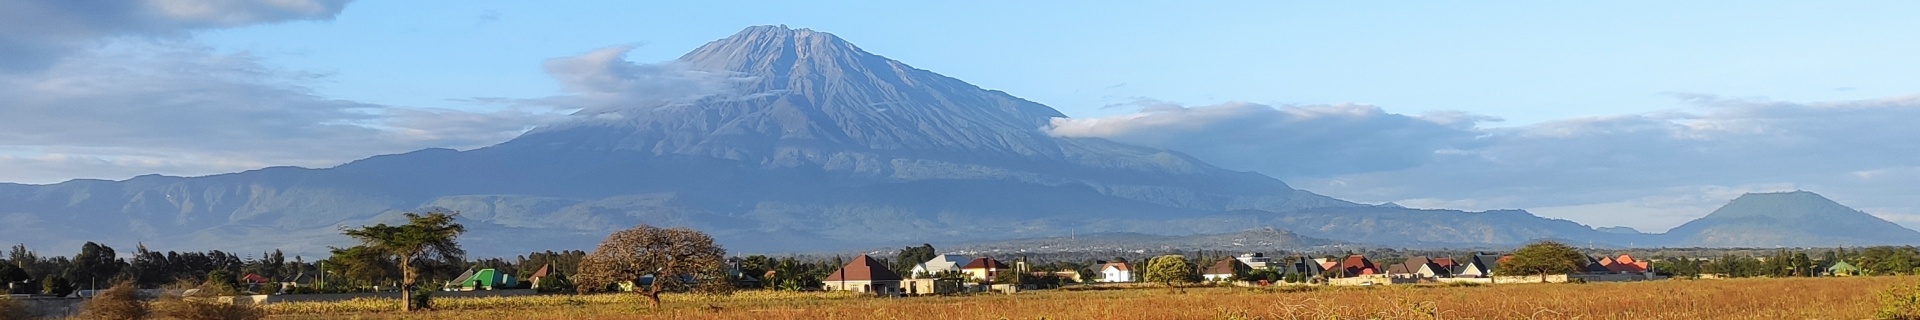 View of the majestic Mount Meru from Kisongo area, near Arusha Airport